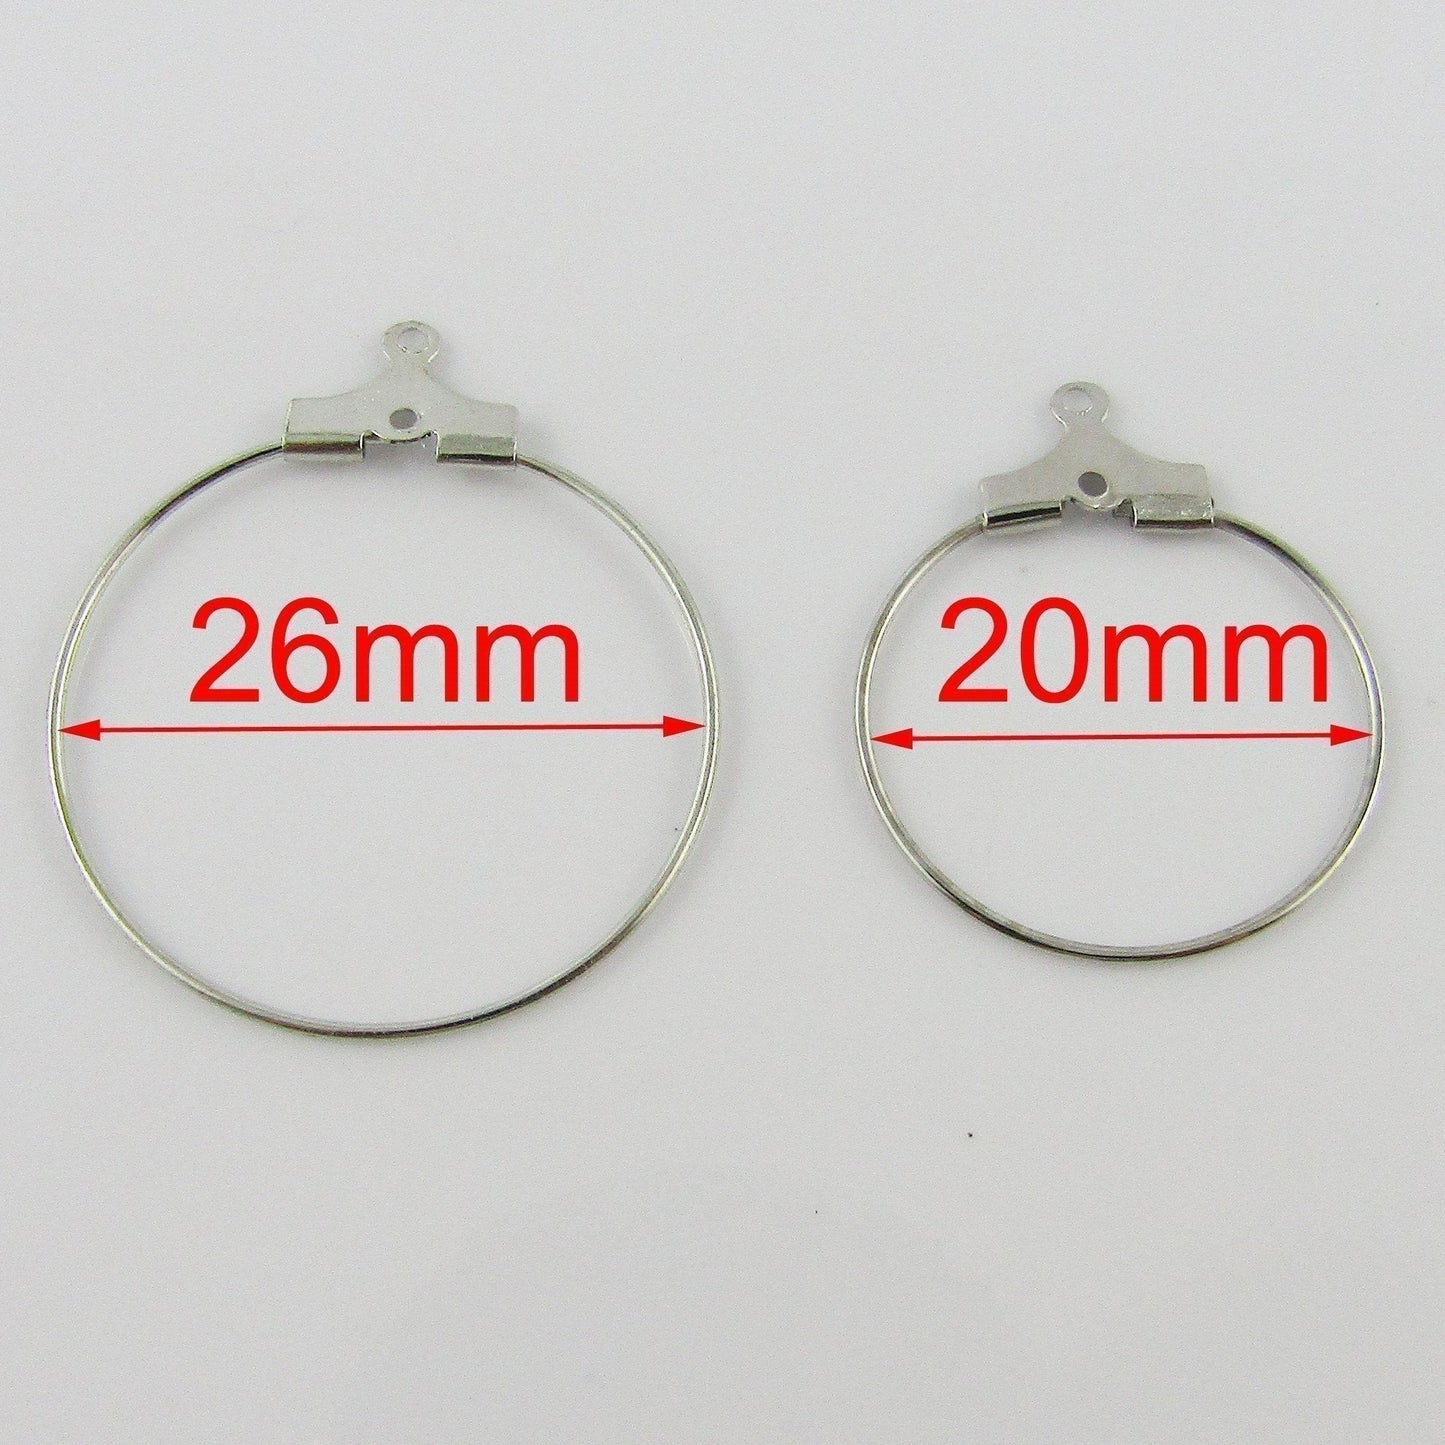 Bulk 10pcs Hoop Wire Earring Component Silver Select Size Opens to Add Beads